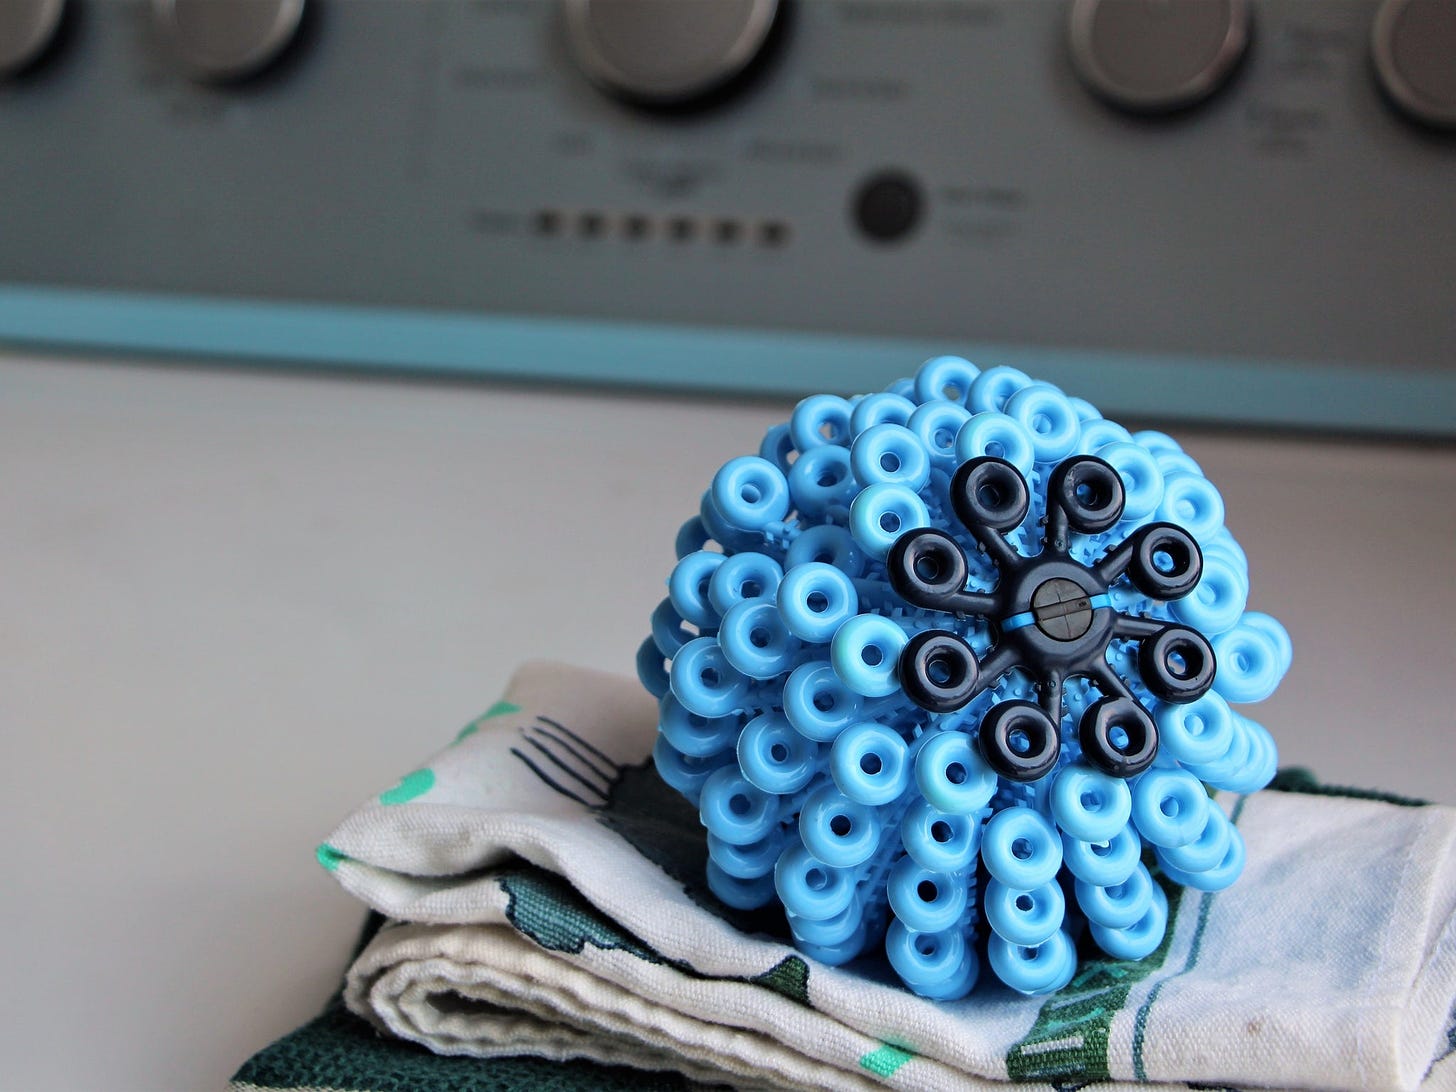 Cora Ball - The World's First Microfiber Catching Laundry Ball